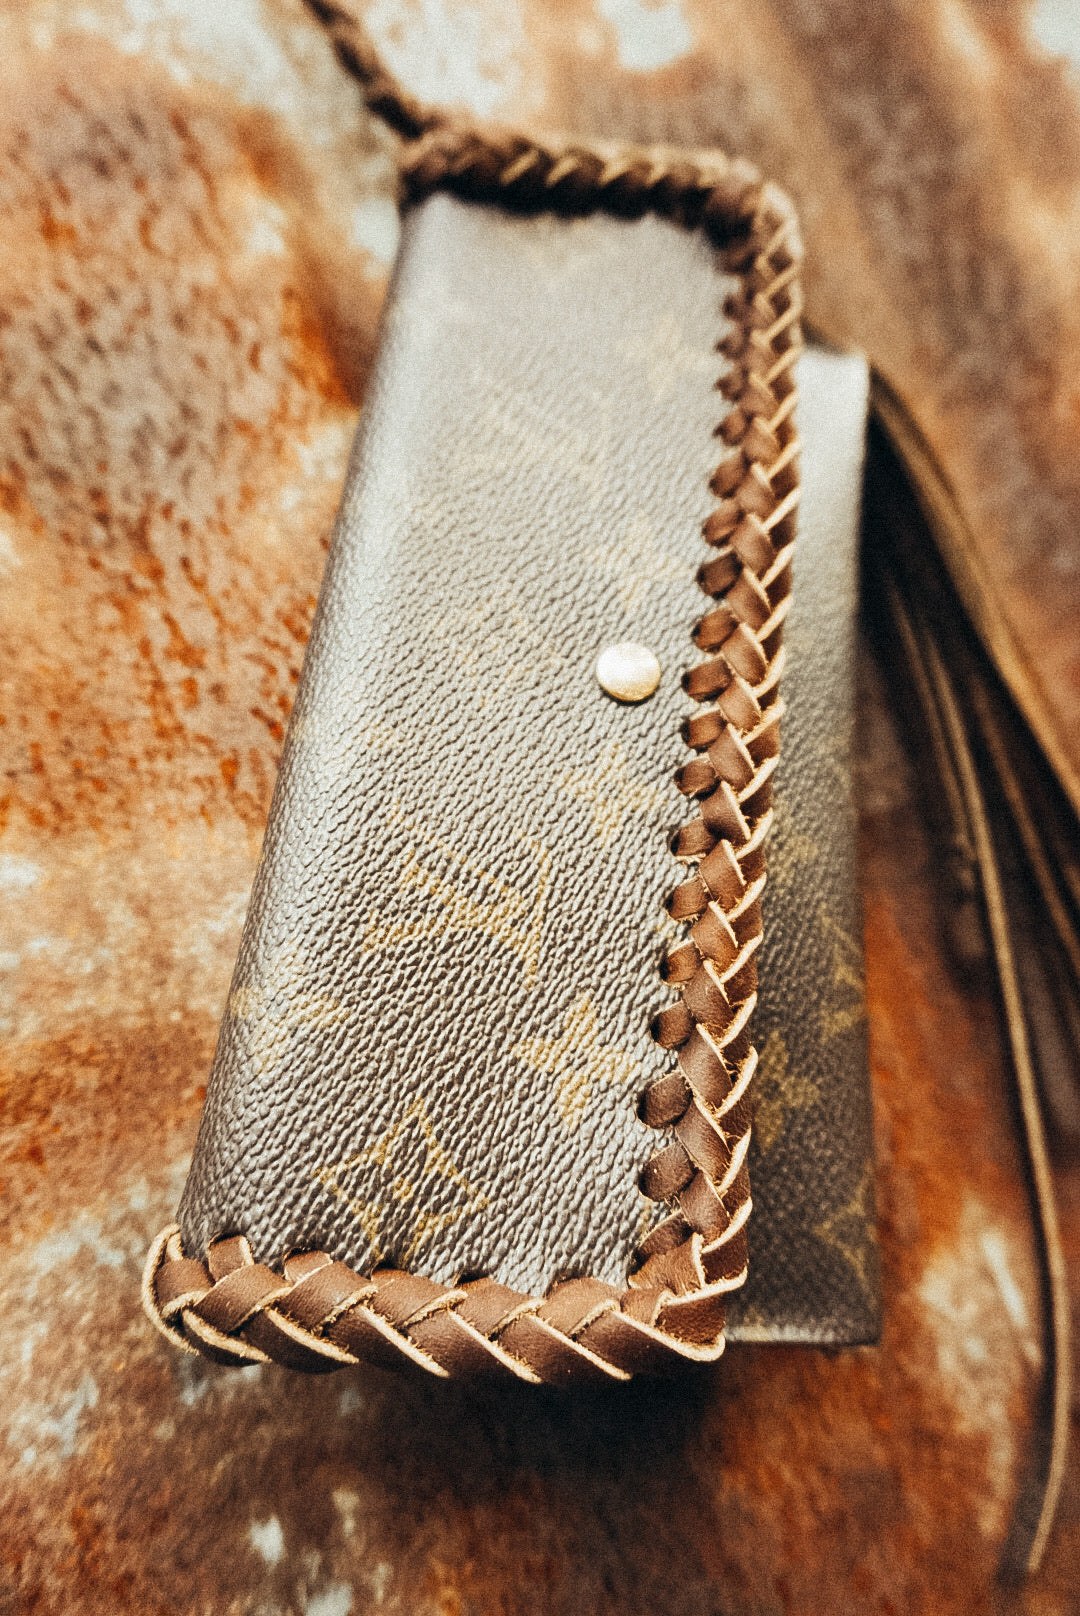 Upcycled Louis Vuitton Cowhide Wallet